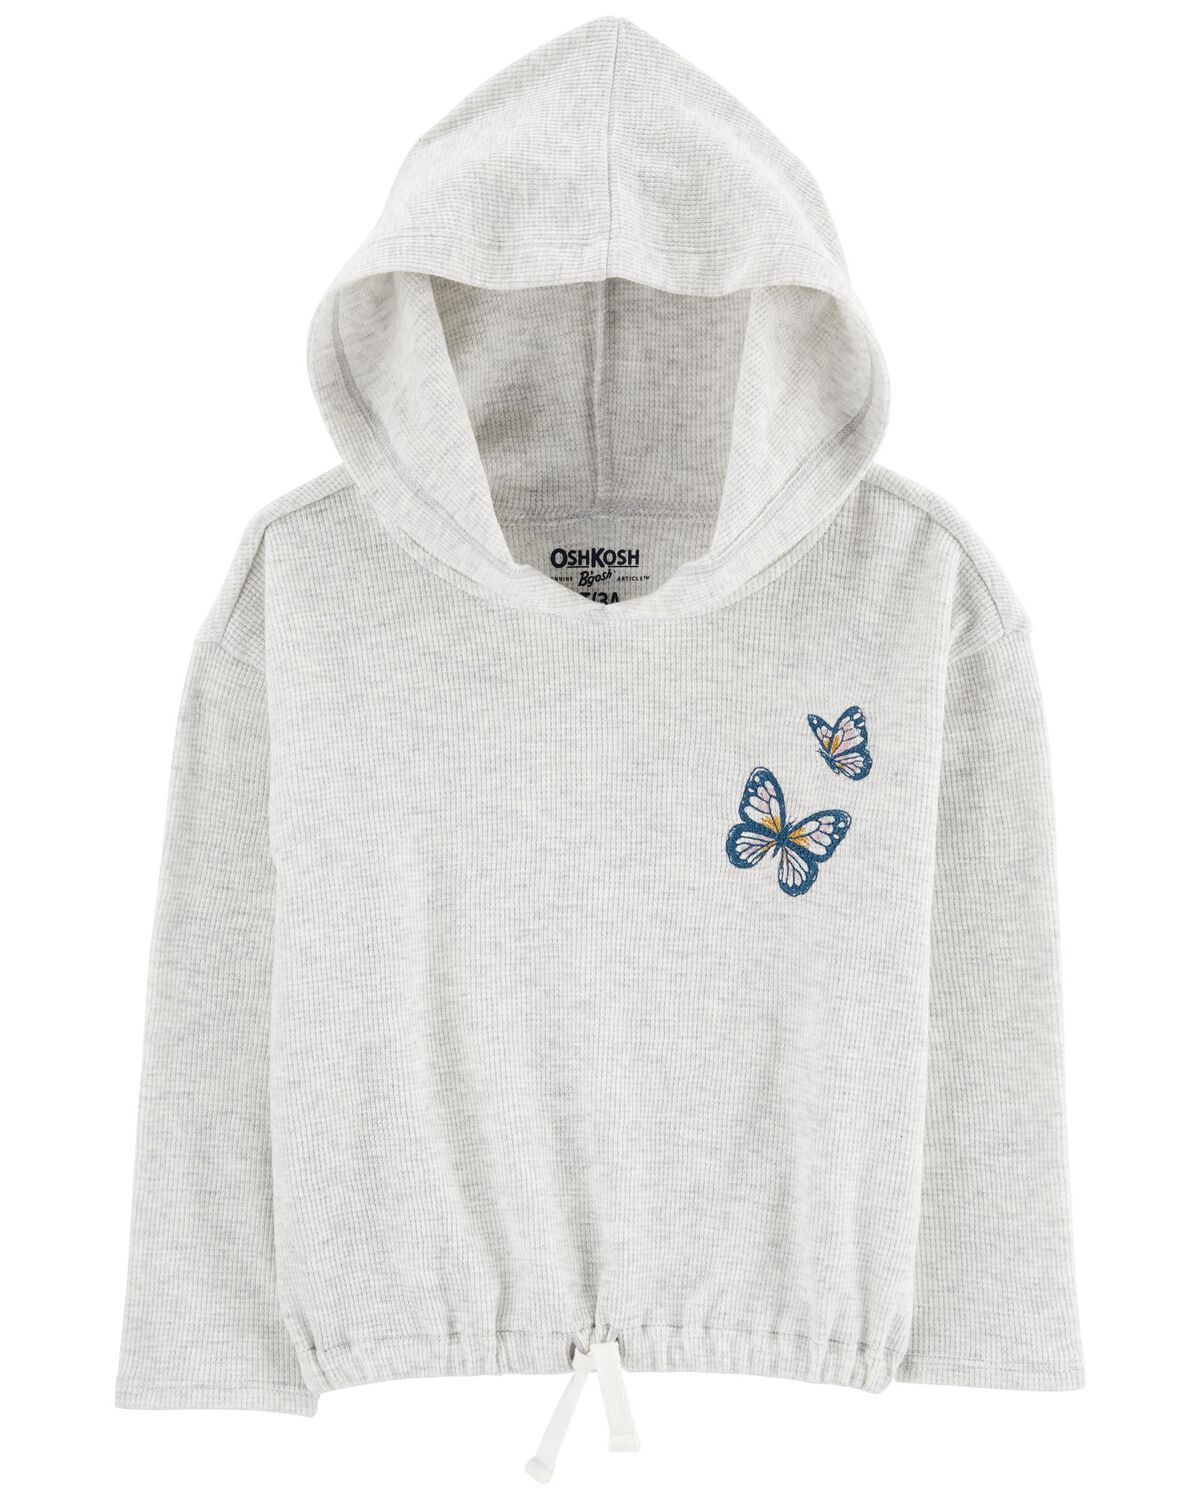 Grey Toddler Thermal Embroidered Top | oshkosh.com